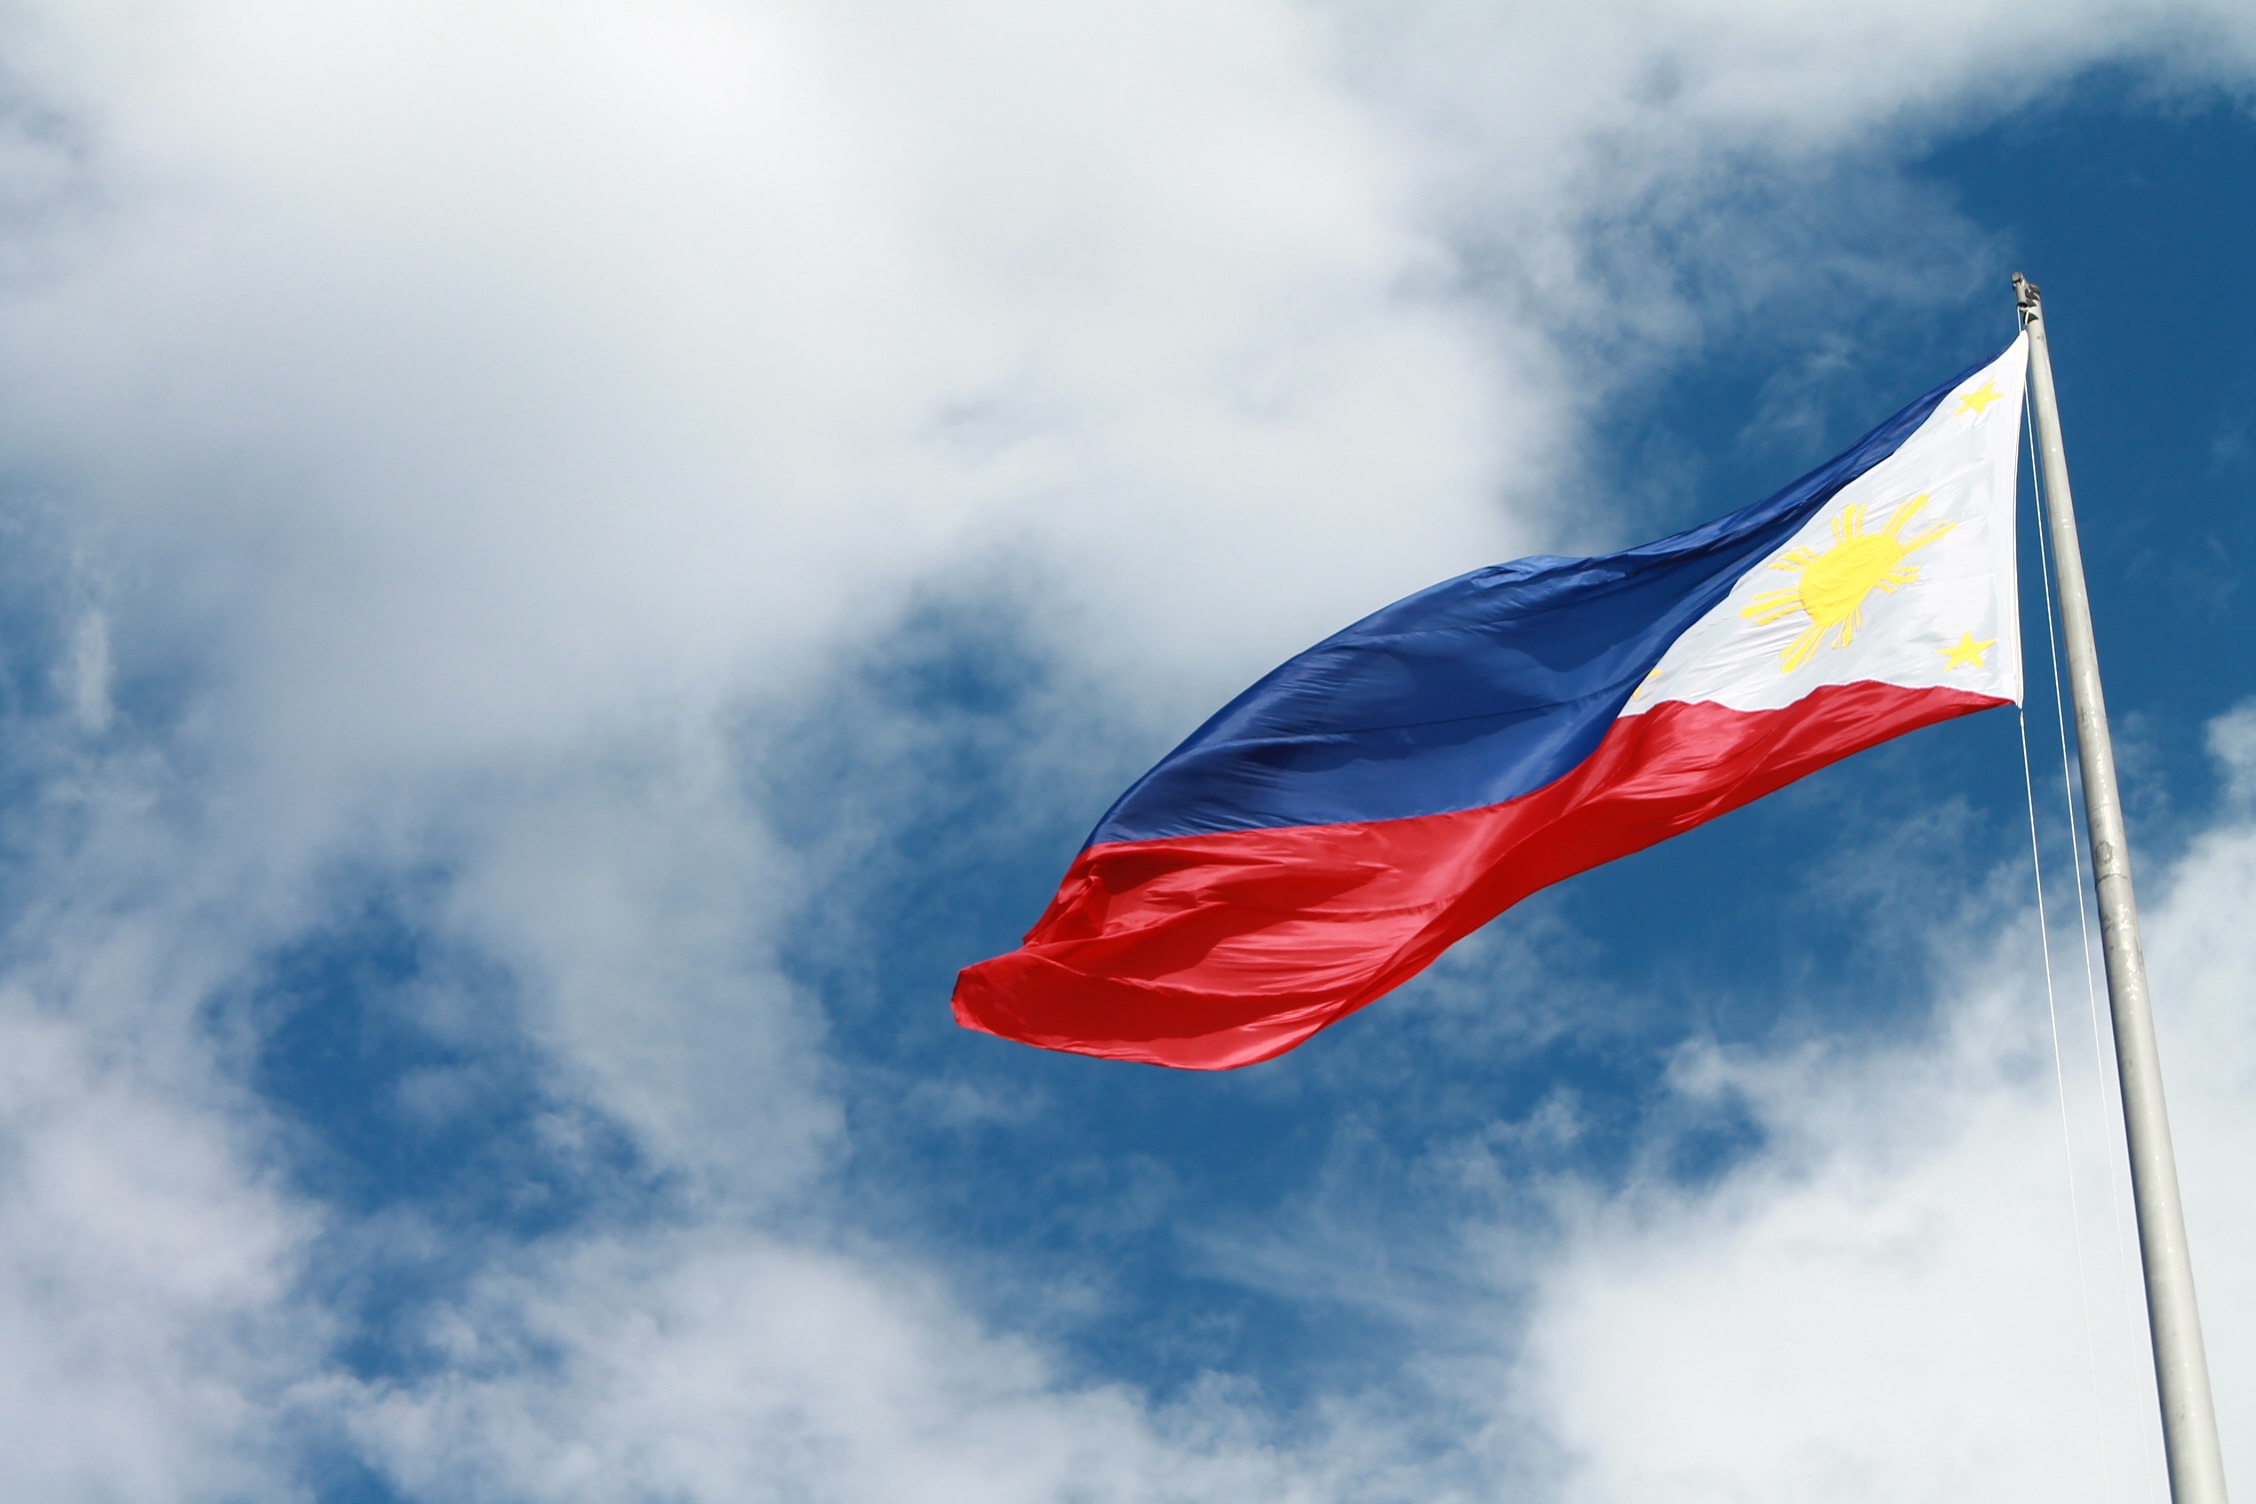 How the Philippines Can Become a Great Nation, According to Big John